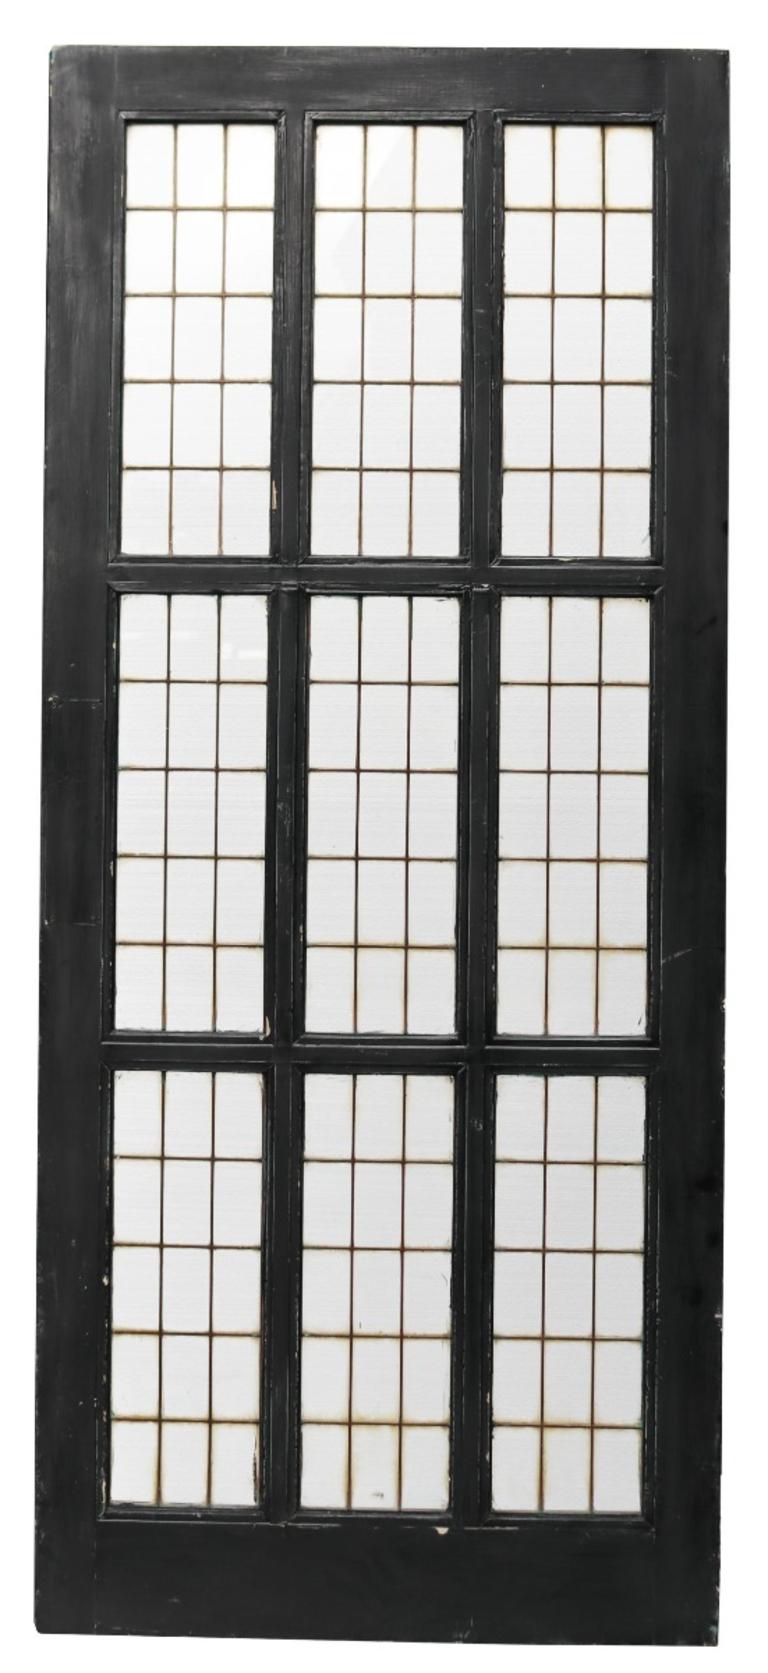 We currently have Twelve of these very fashionable copper-light glazed doors in stock.

We also have 18 sets of double doors available.

Reclaimed from Stanbury Court, London.

Price is per door

Measures: 198 x 88 x 4.6 cm

203 x 81 x 4.6